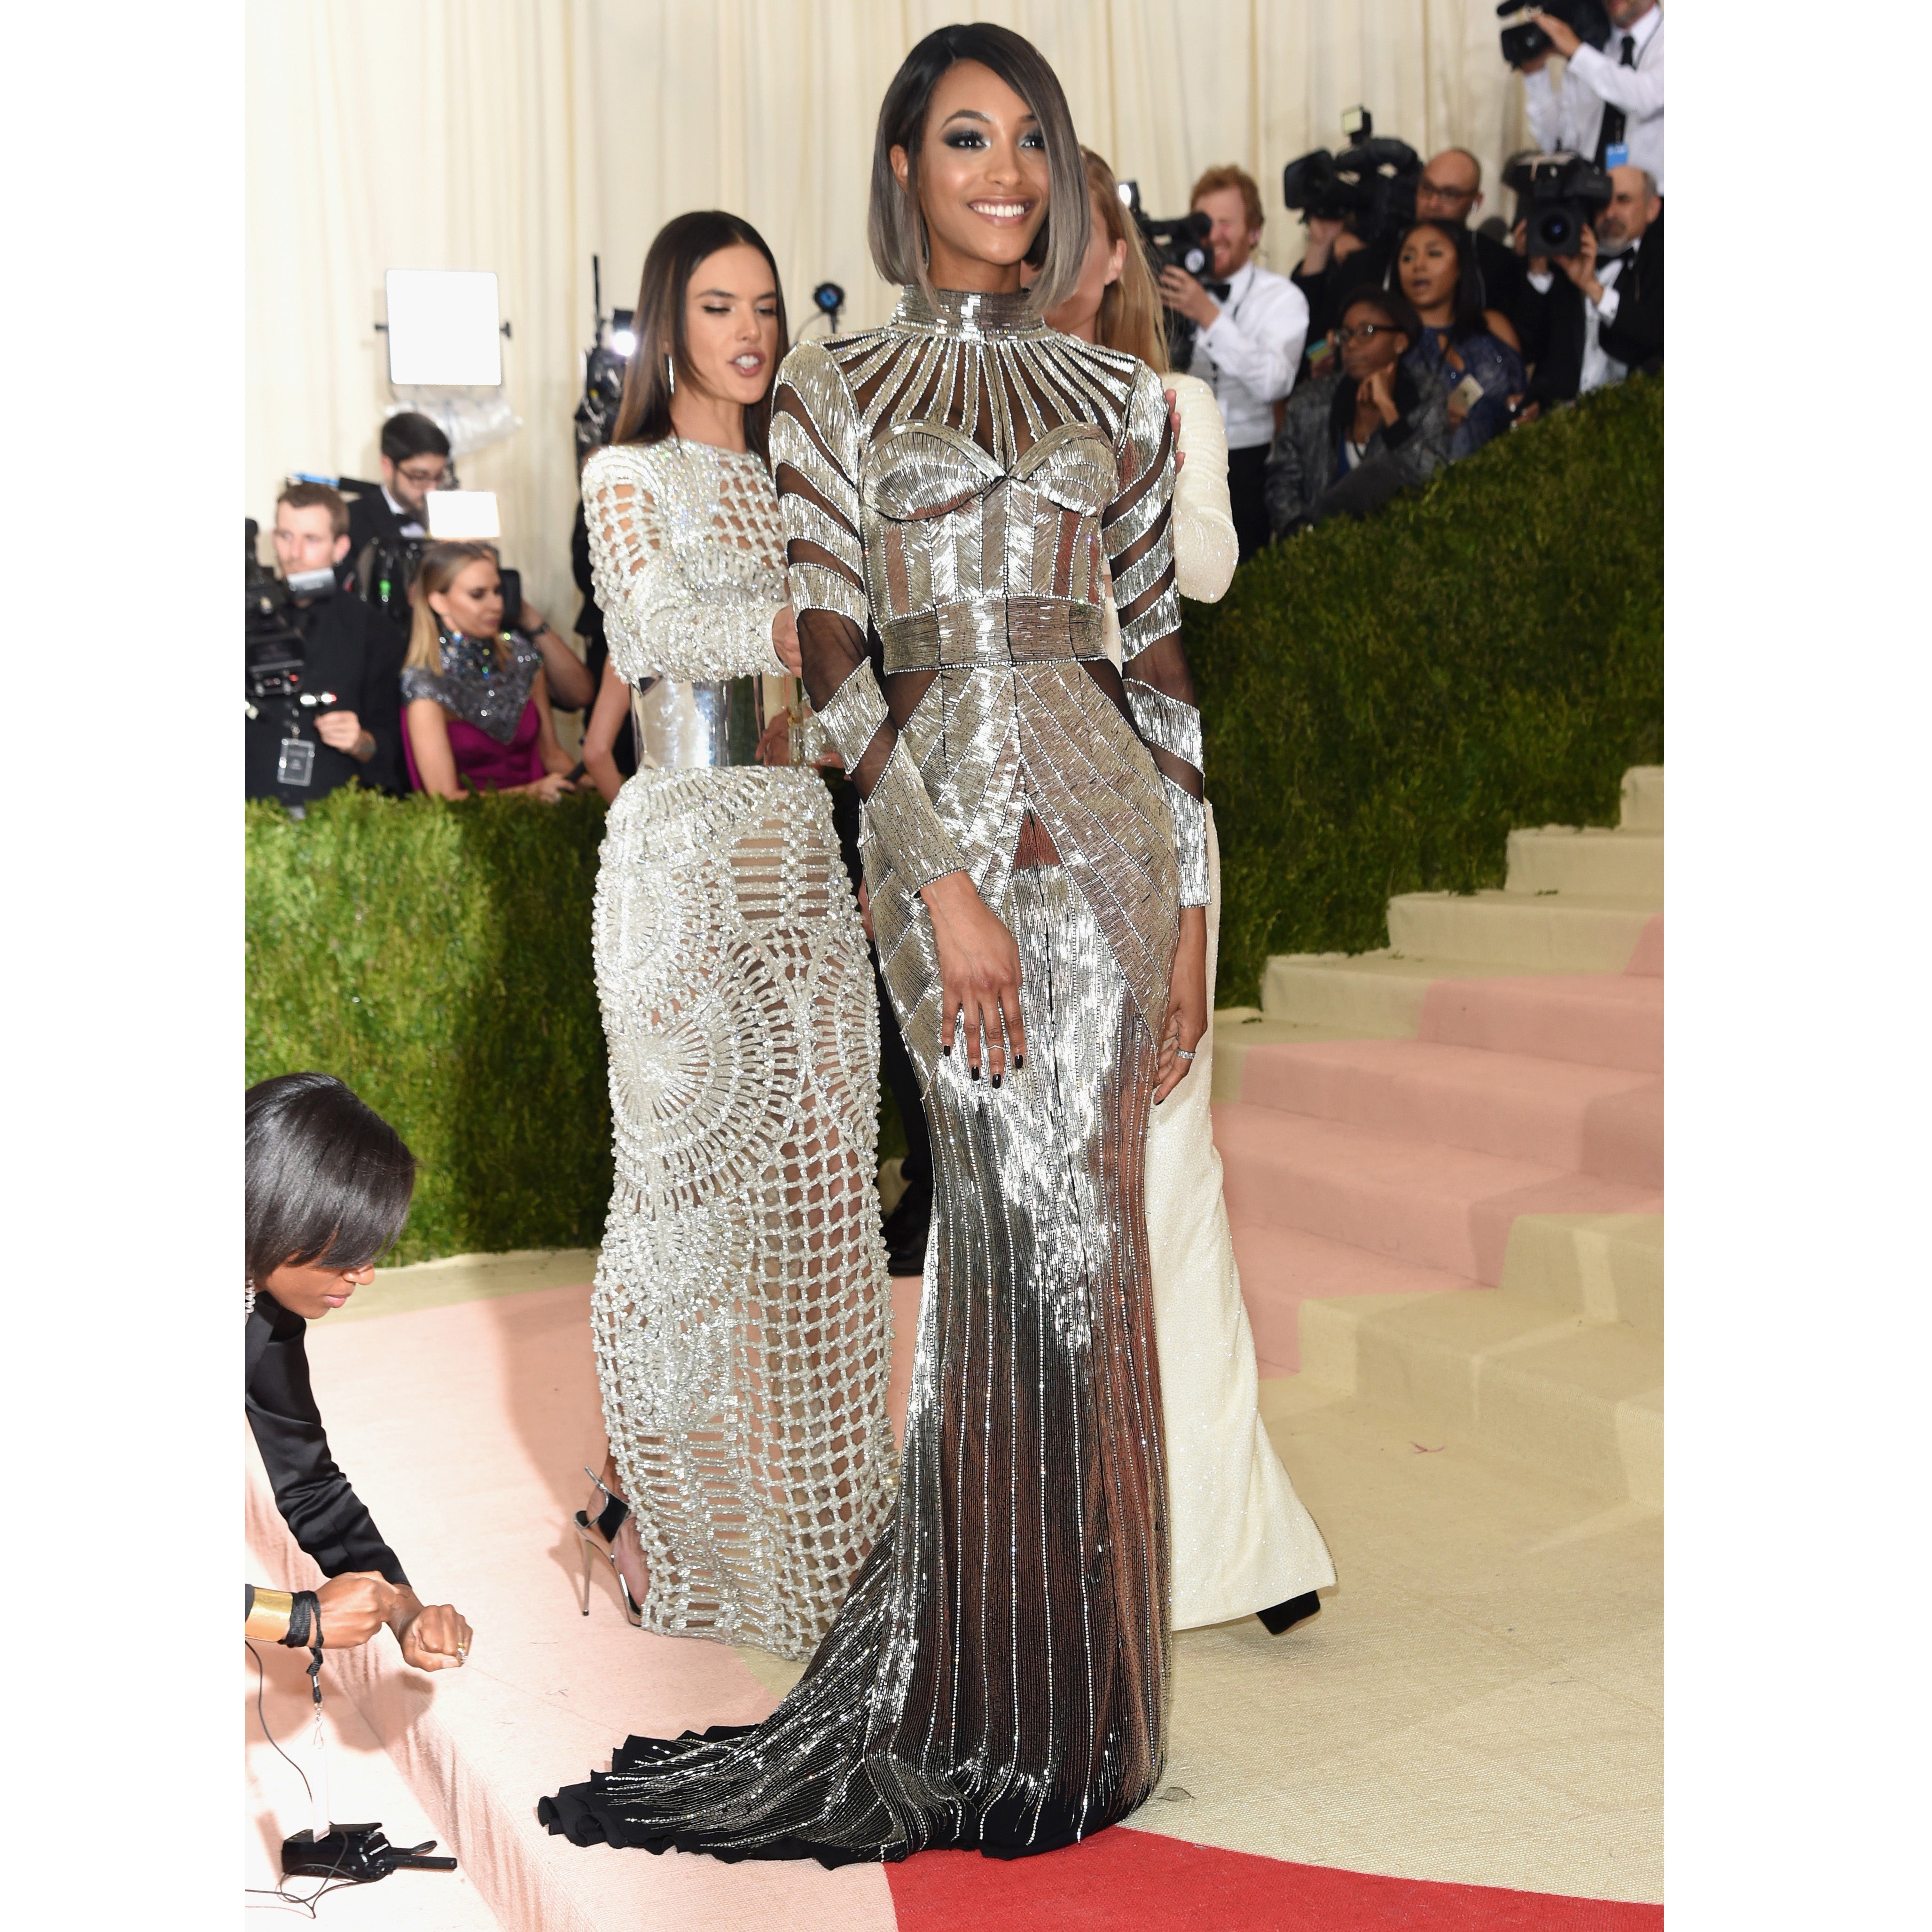 The 2016 Met Gala Red Carpet Was Out Of This World
